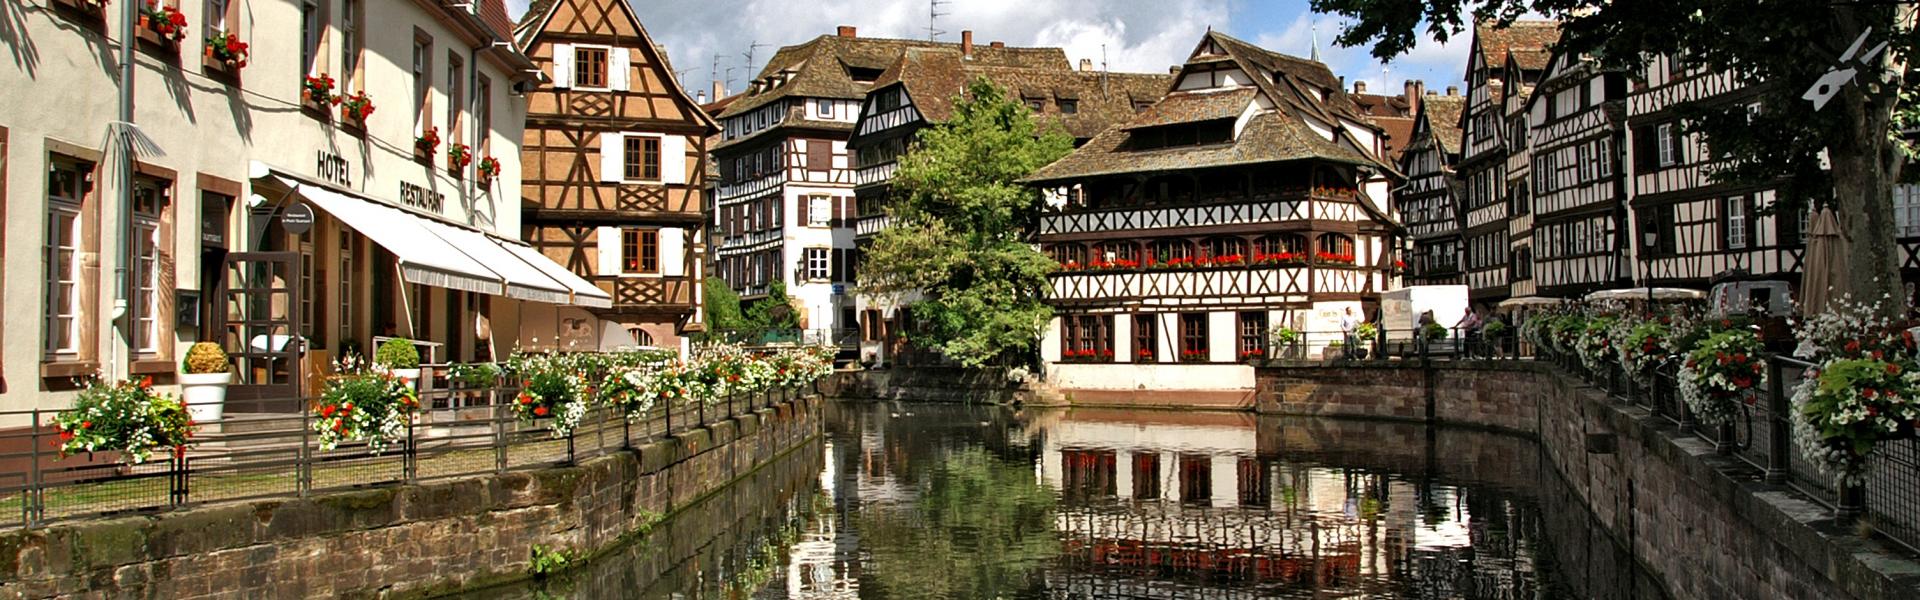 Find the perfect vacation home in Alsace - Casamundo